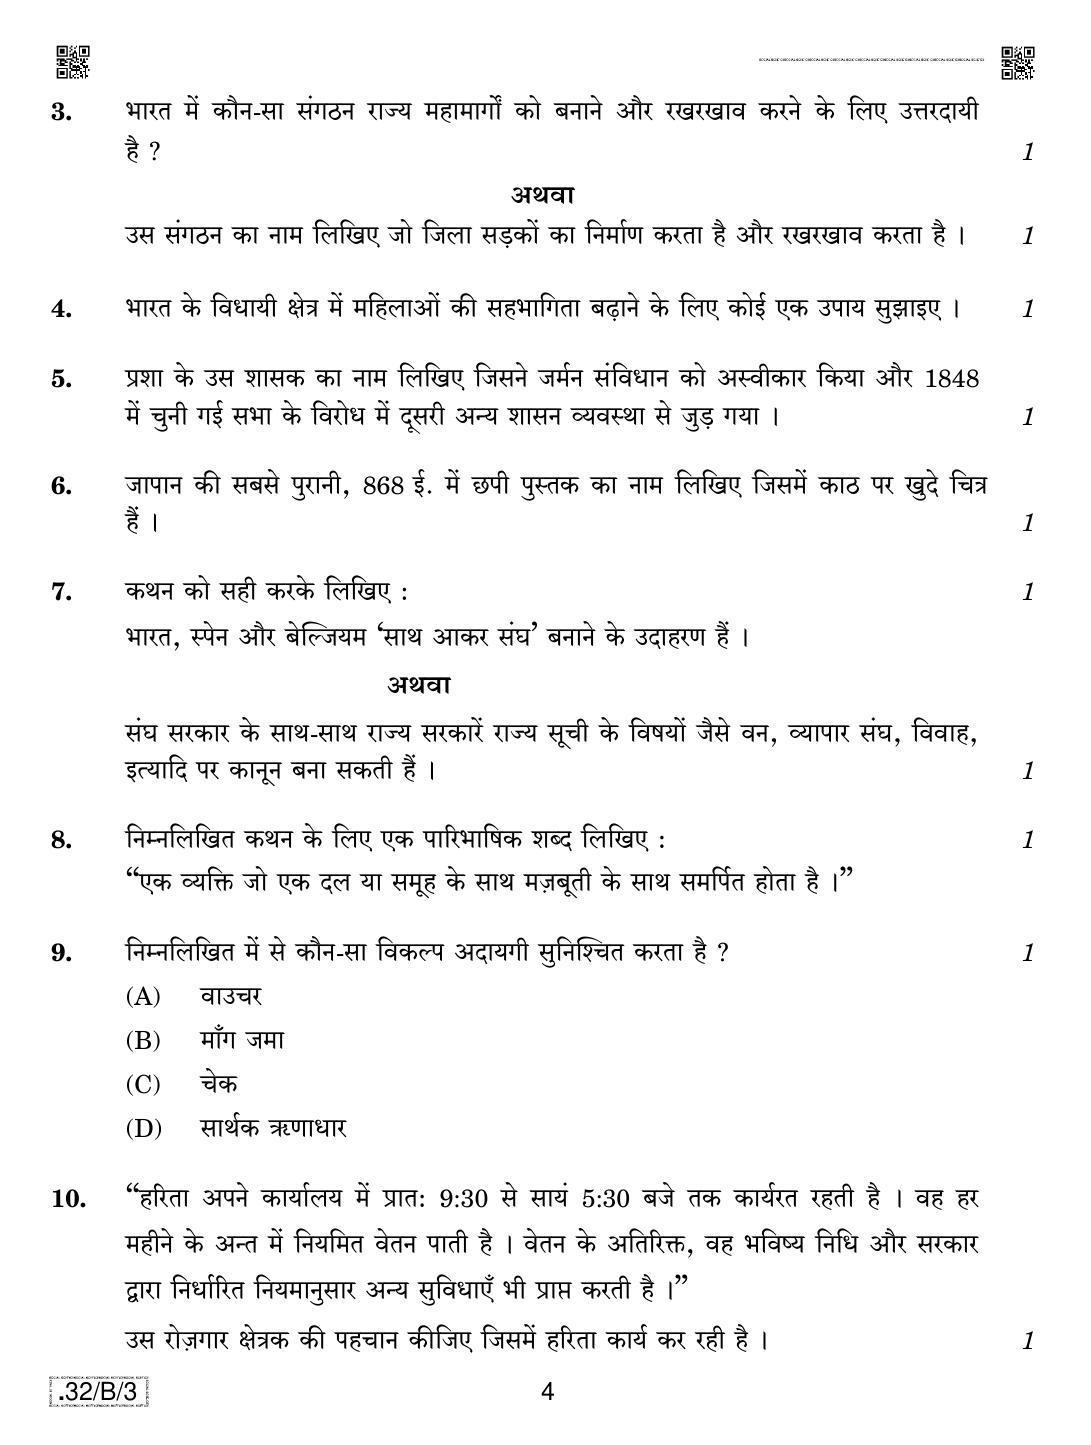 CBSE Class 10 32-C-3 Social Science 2020 Compartment Question Paper - Page 4